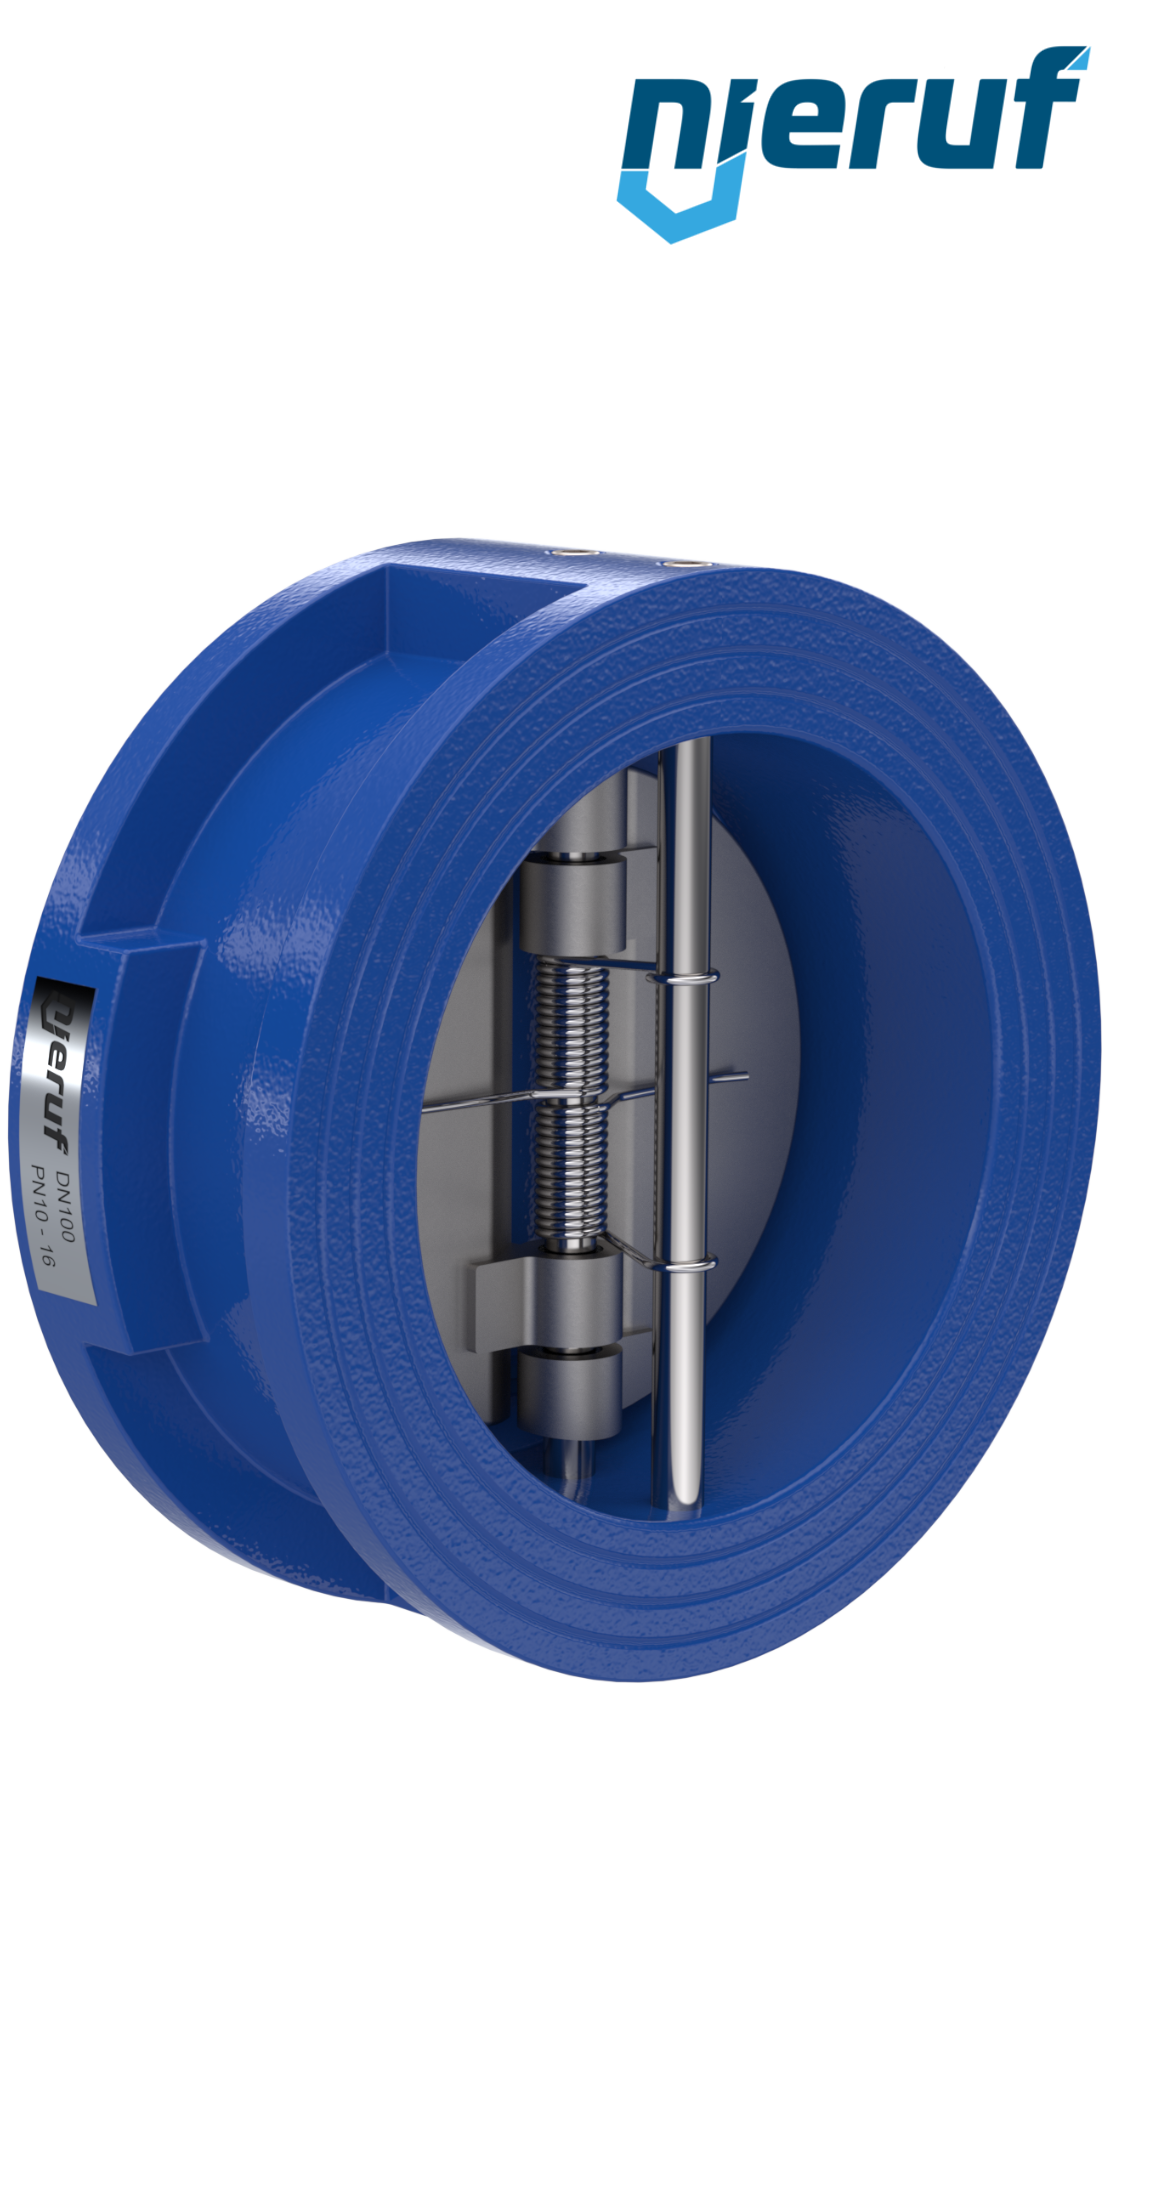 dual plate check valve DN100 DR02 GGG40 epoxyd plated blue 180µm EPDM